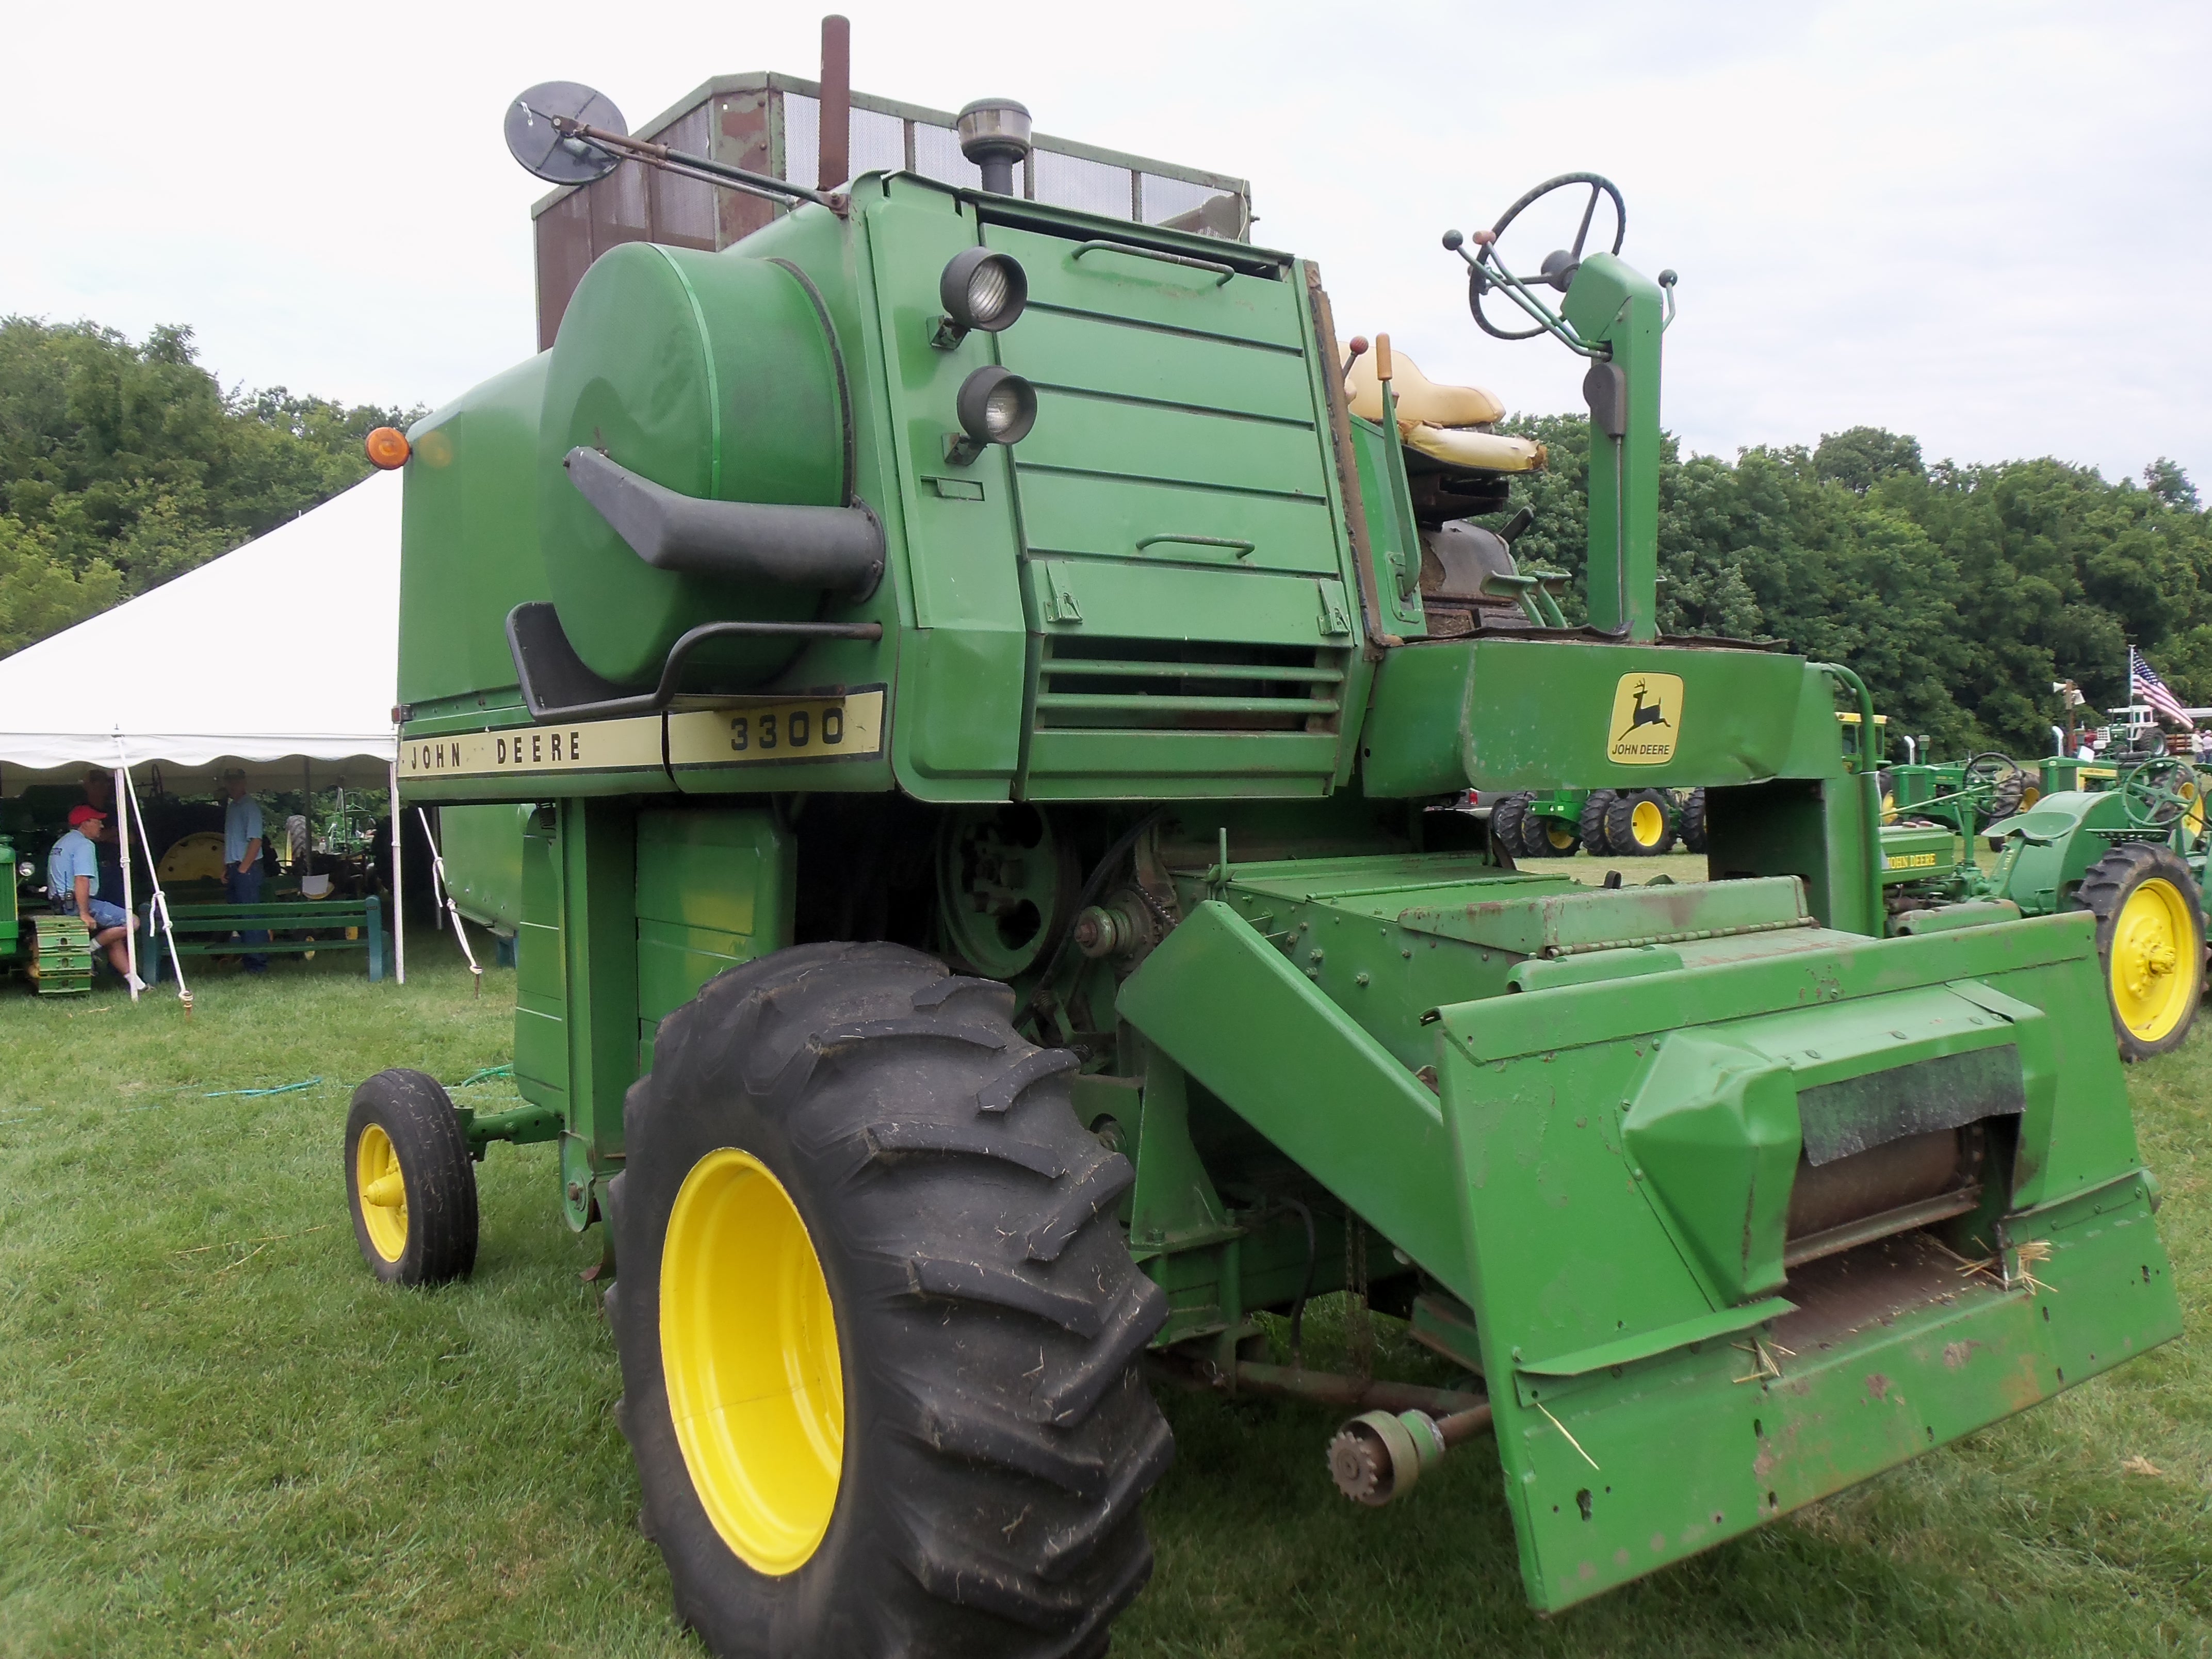 The John Deere 3300 was the smallest of the New Generation ...